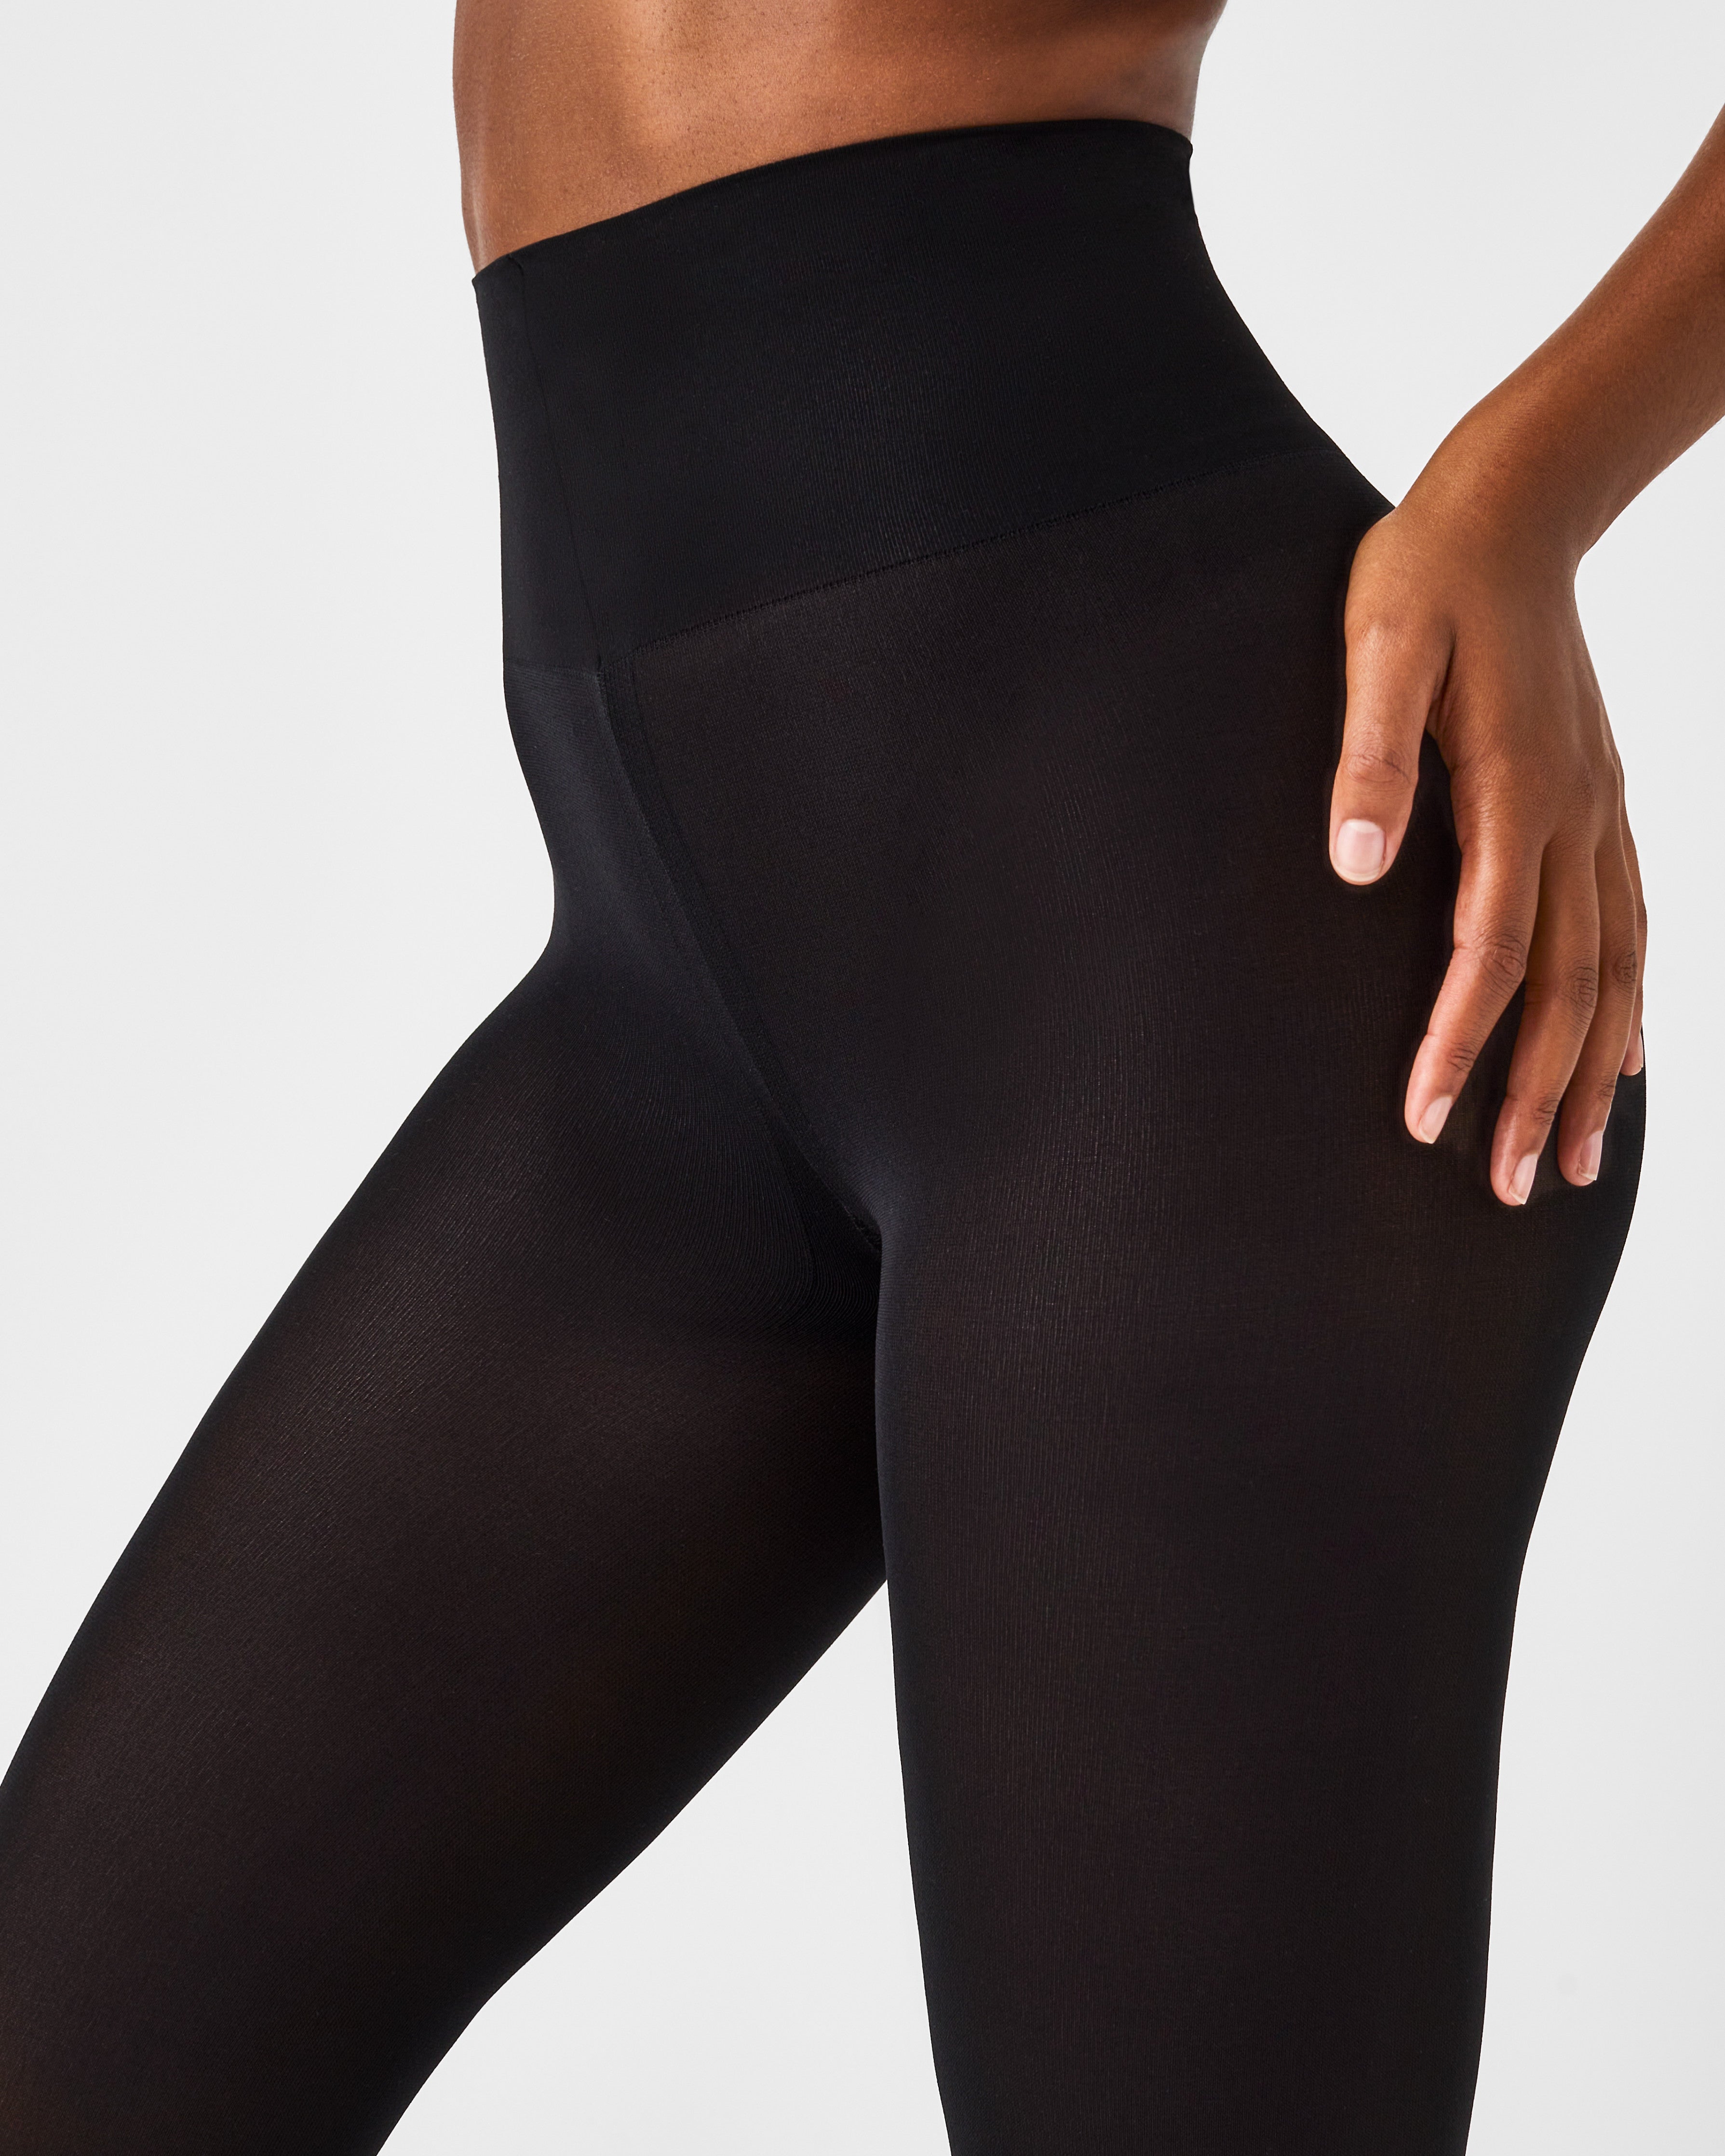 Spanx Tummy Shaping Tights destroyed plaid lace metallic shimmer black navy  A D